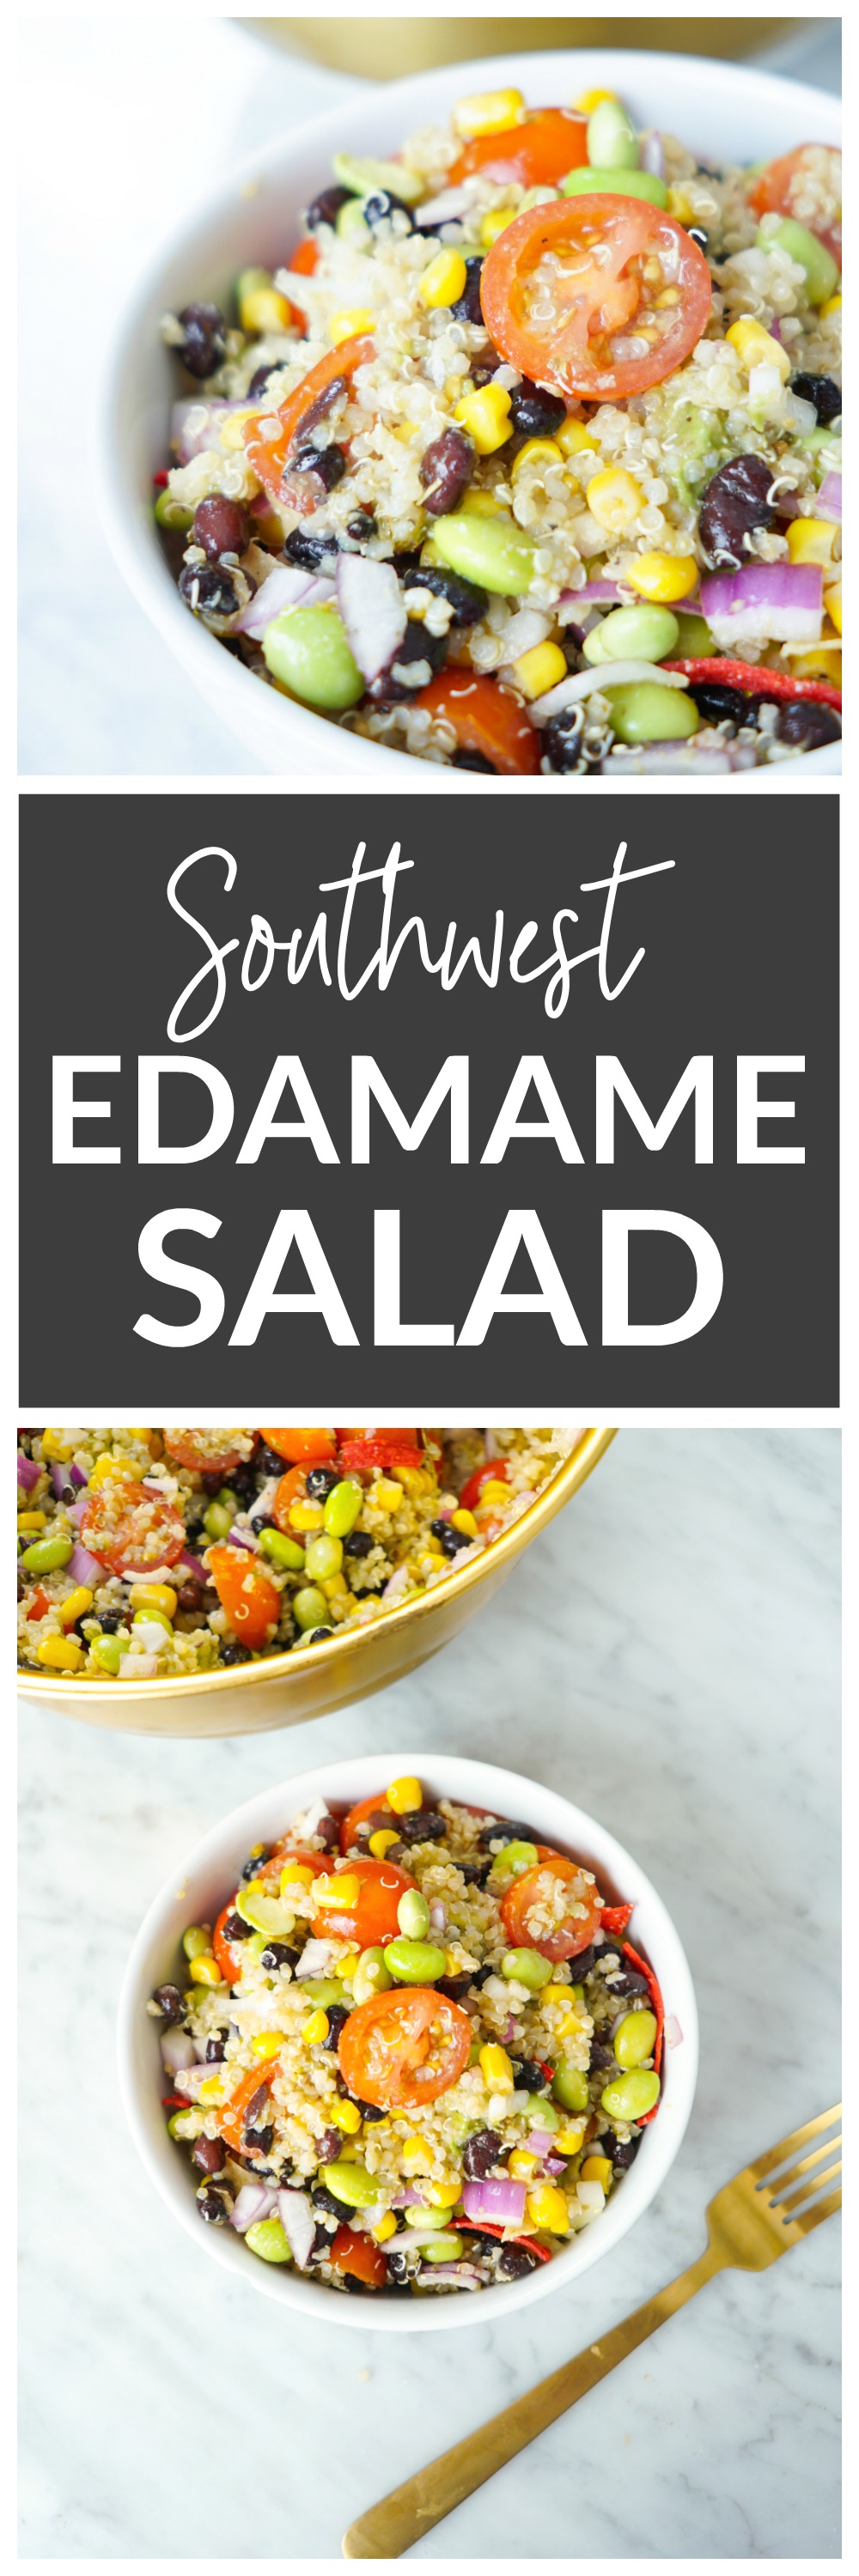 Southwest Edamame Salad - packed with vegan plant protein!